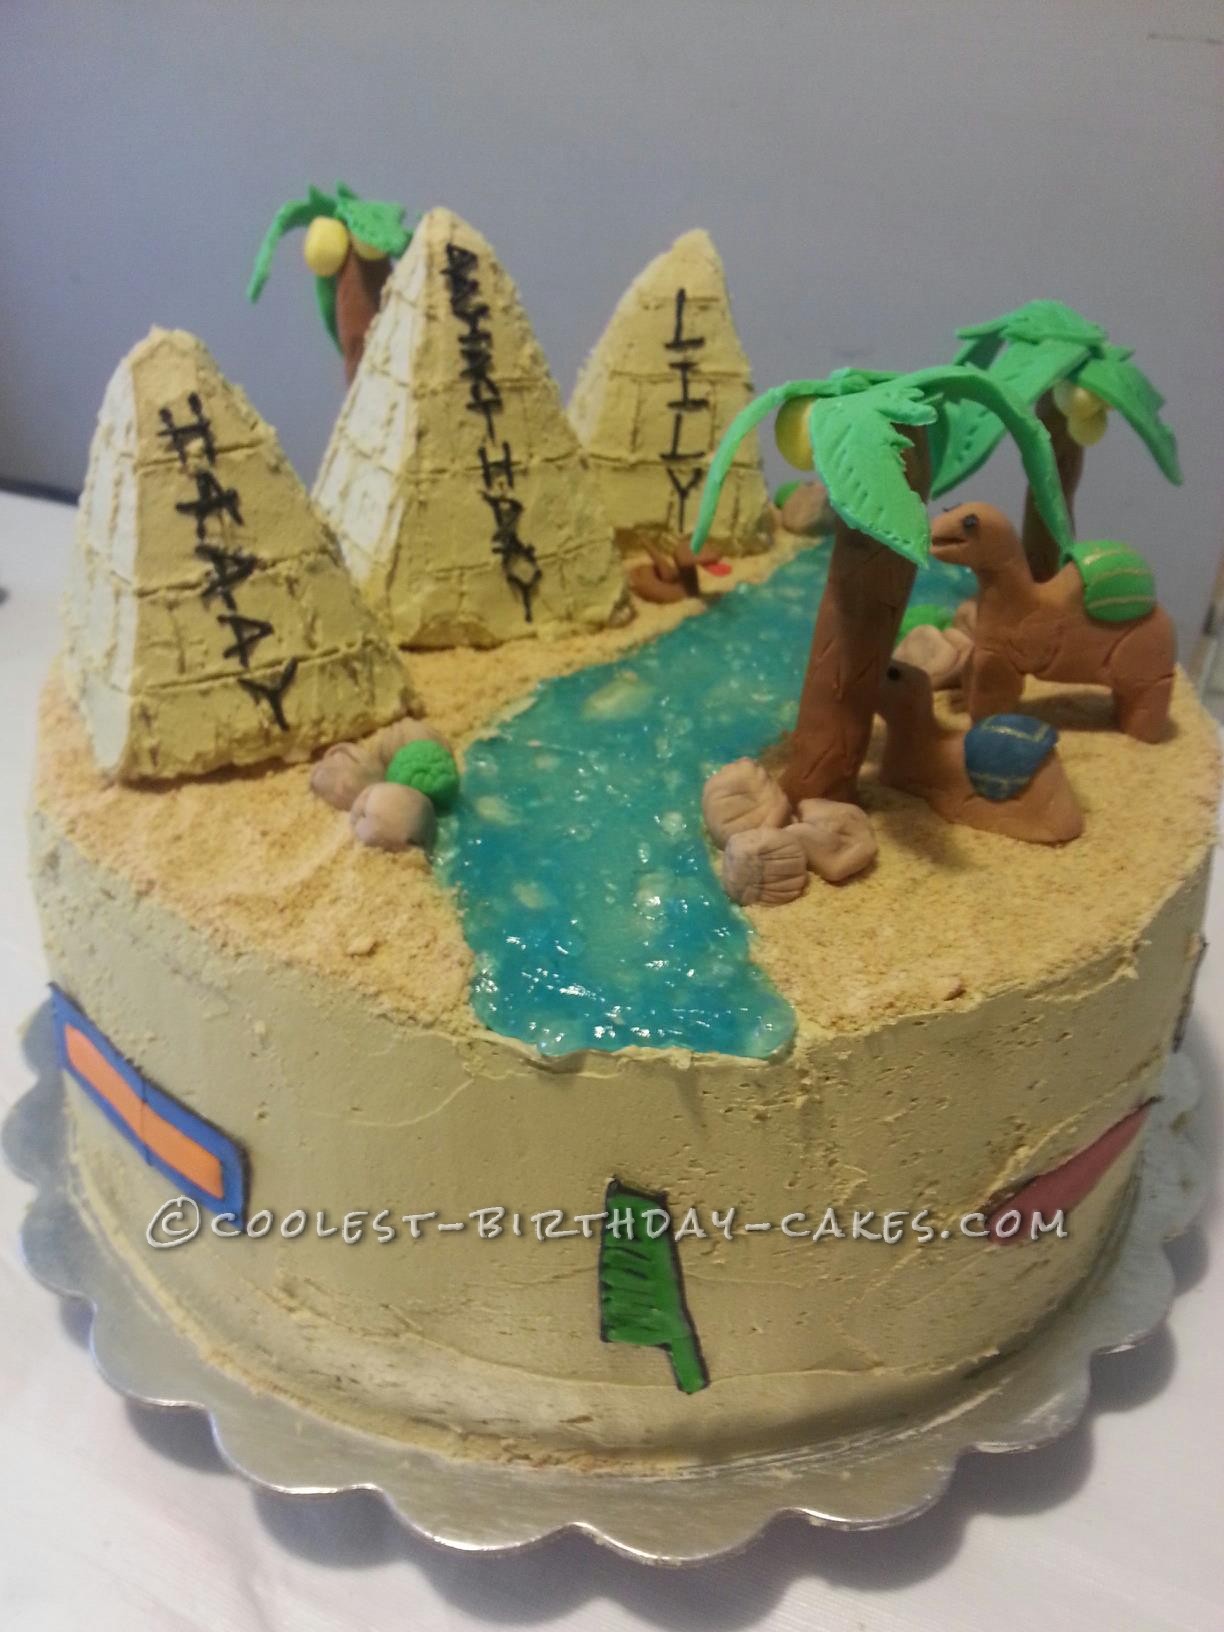 Ancient Egypt and Elmo collide for a Double Birthday Cake Bash